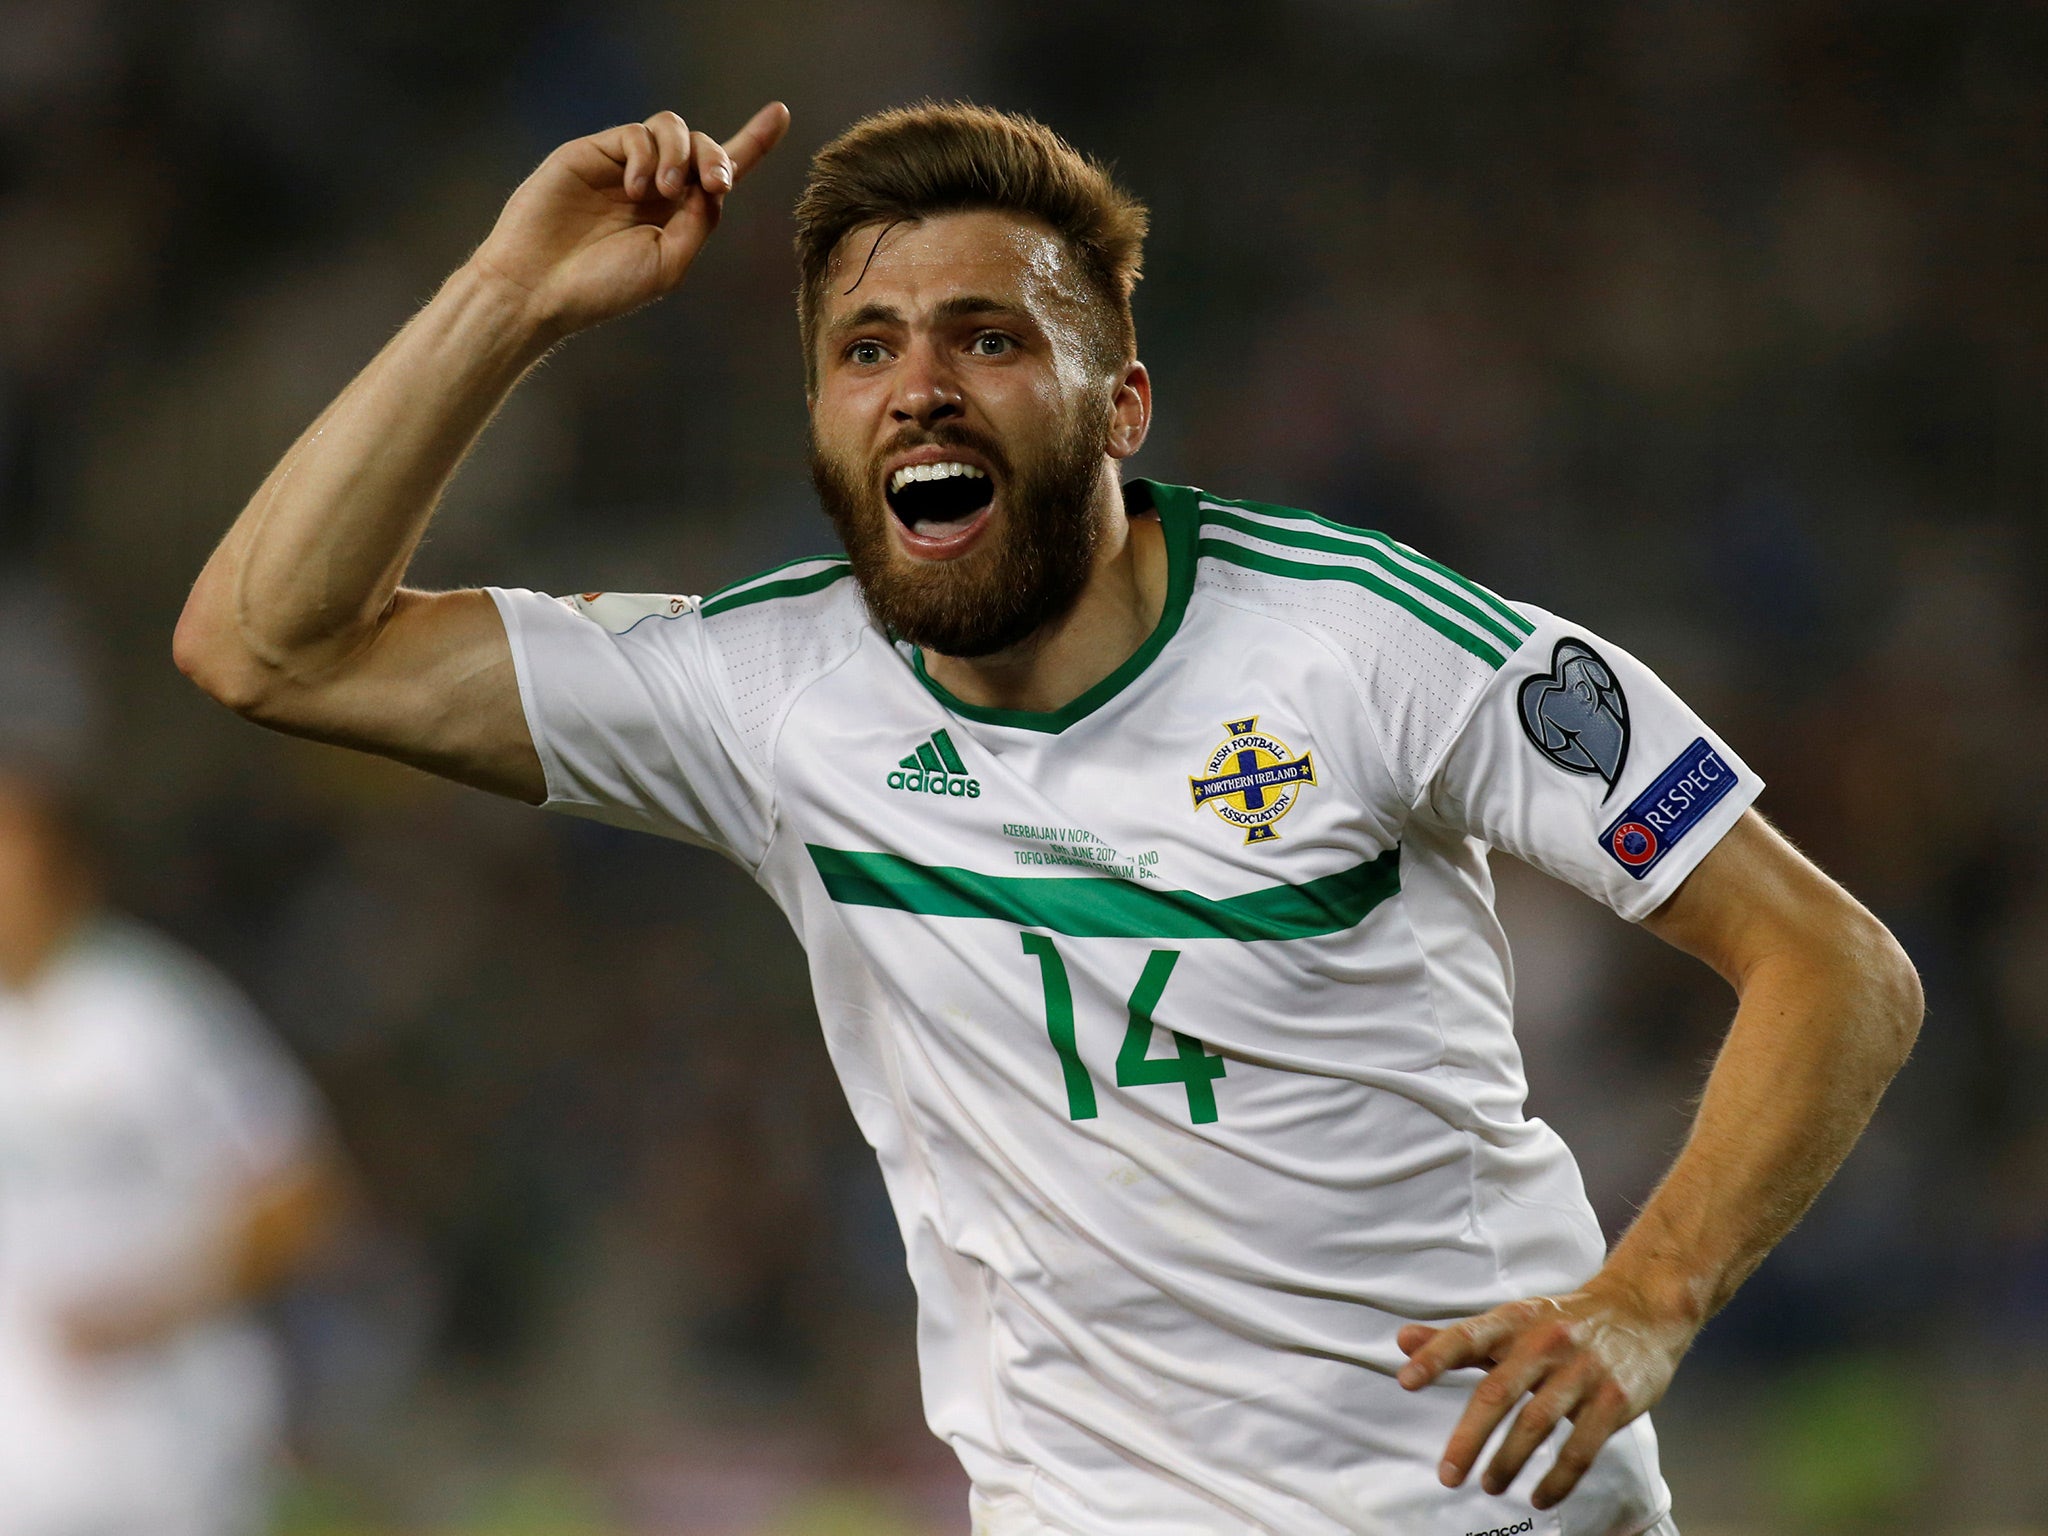 Stuart Dallas rifled in a late winner to earn a crucial win for Northern Ireland